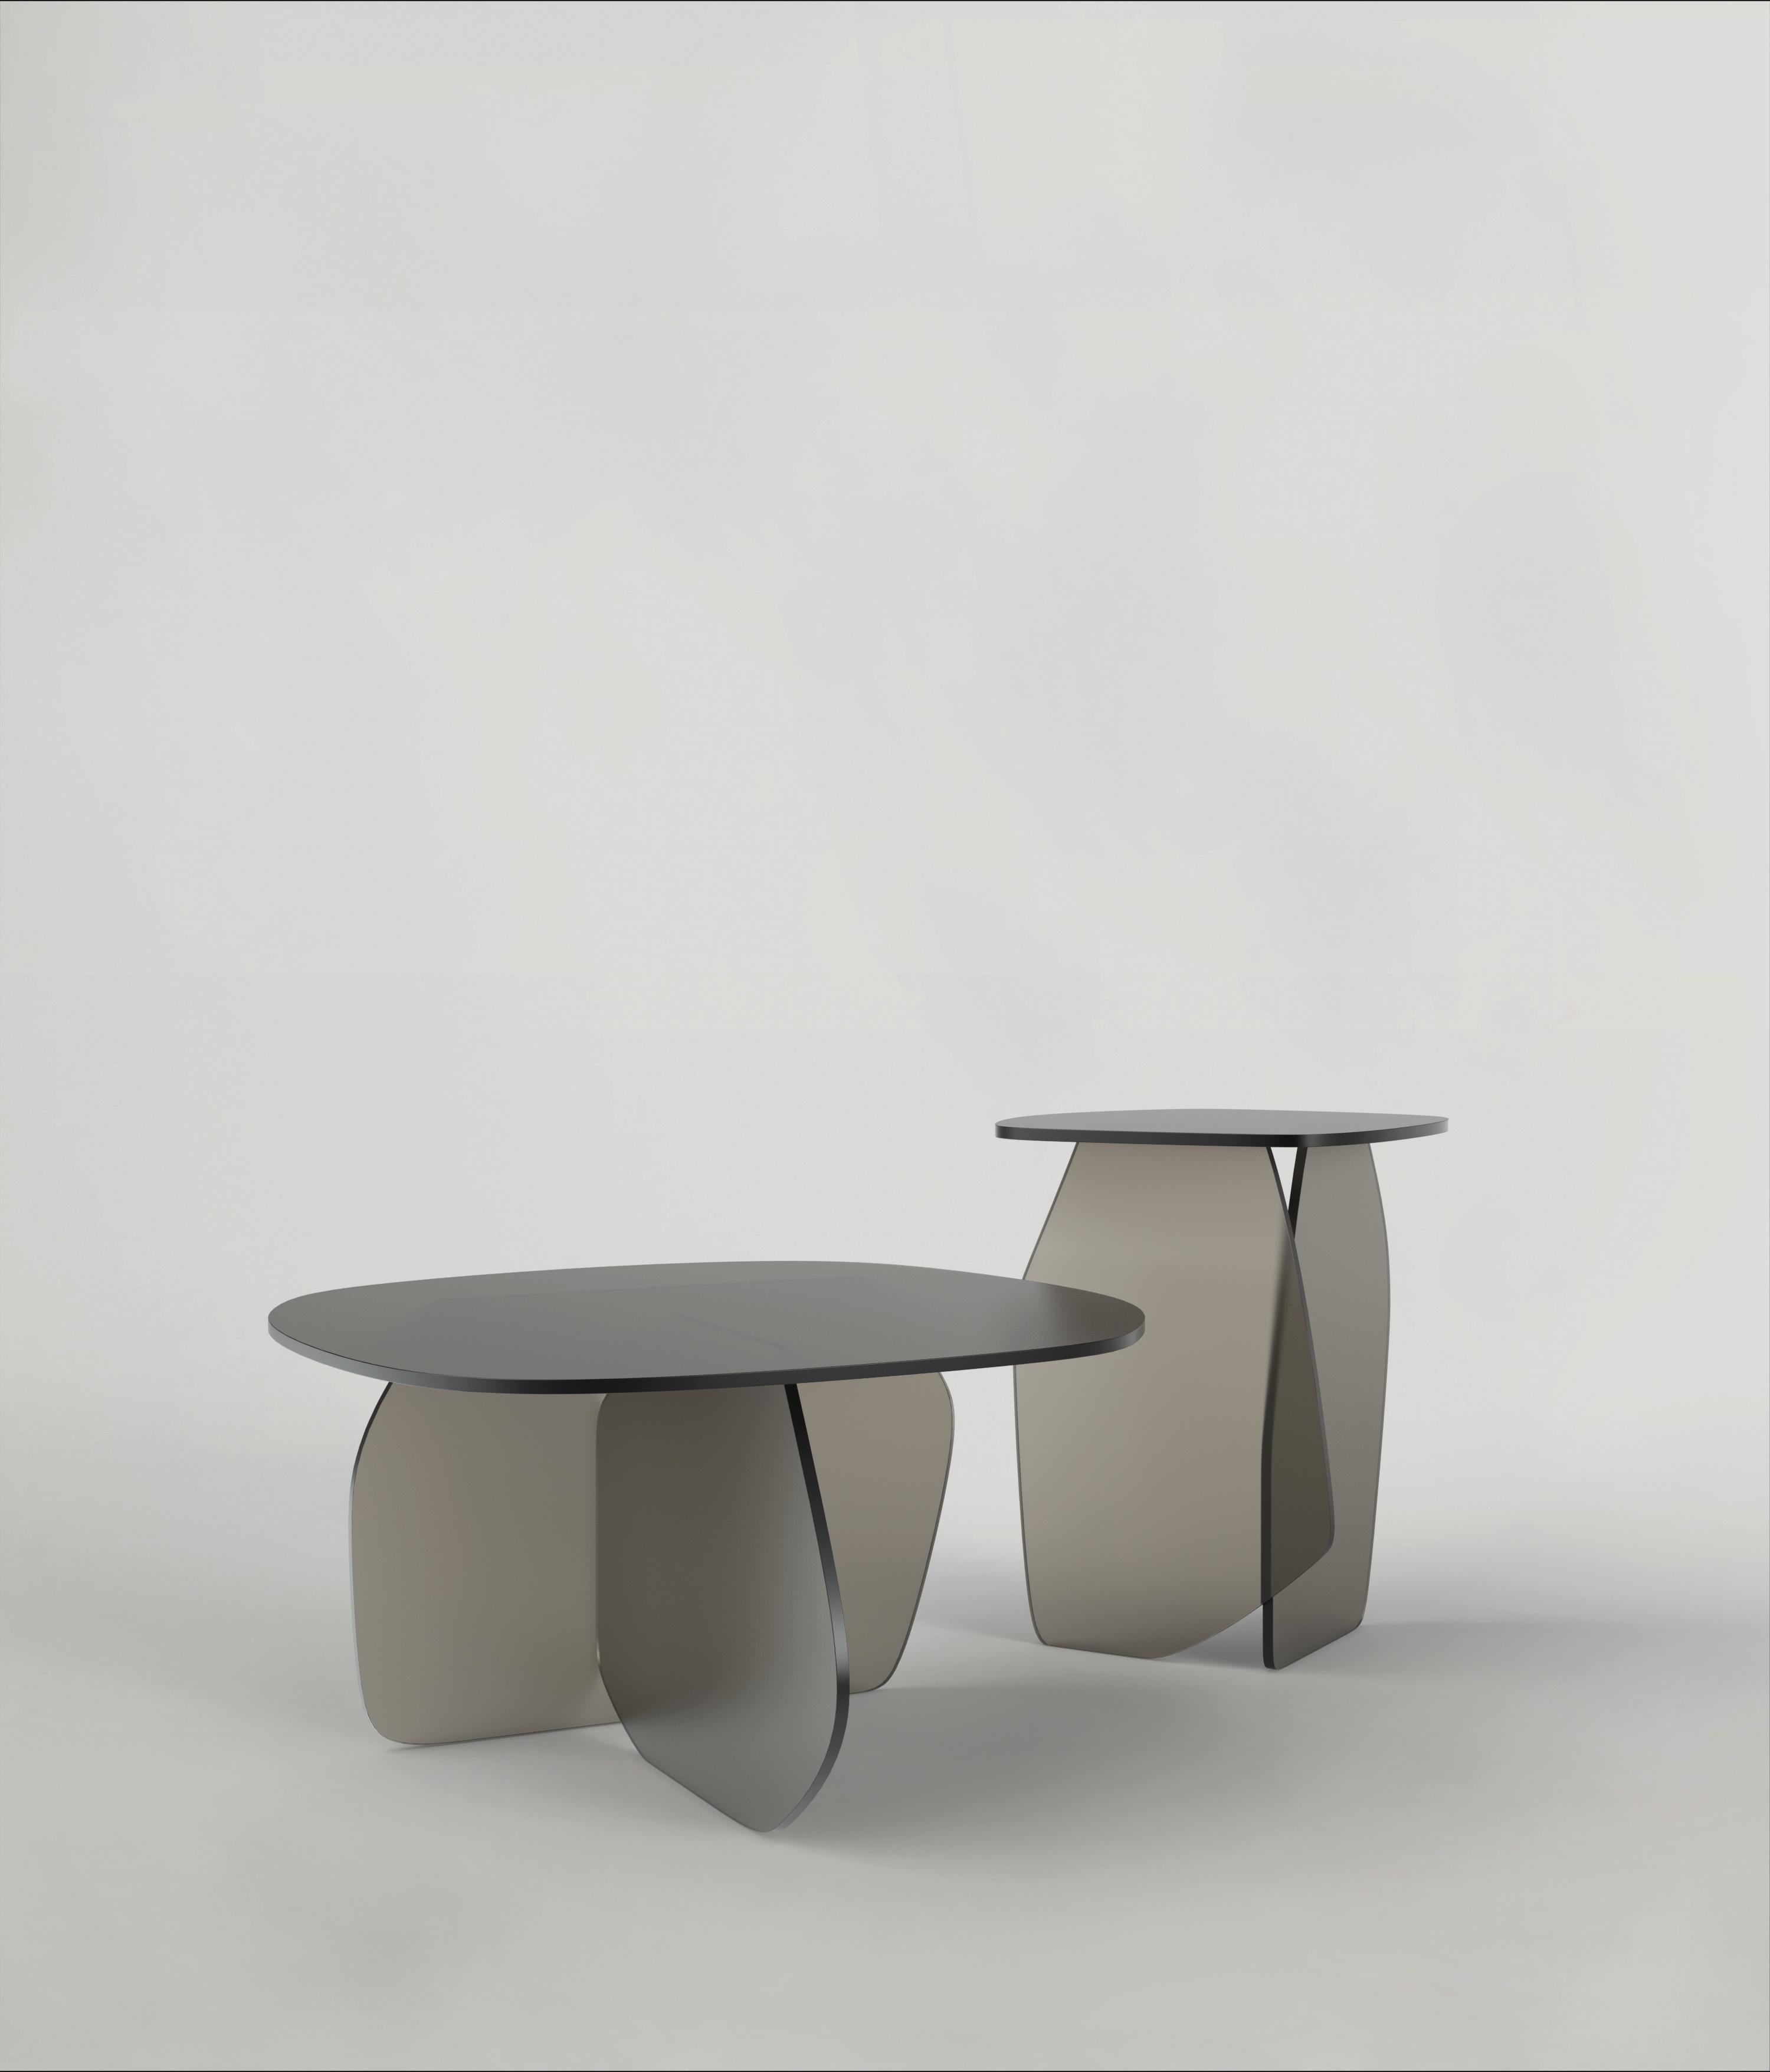 Set of 2 Panorama V1 and V2 Tables by Edizione Limitata
Limited Edition of 1000 pieces. Signed and numbered.
Dimensions: D33 x W59 x H44 //D60x W59 x H33 cm 
Materials: Grey Satin Glass

Panorama V1 and V2 are respectively contemporary side and low